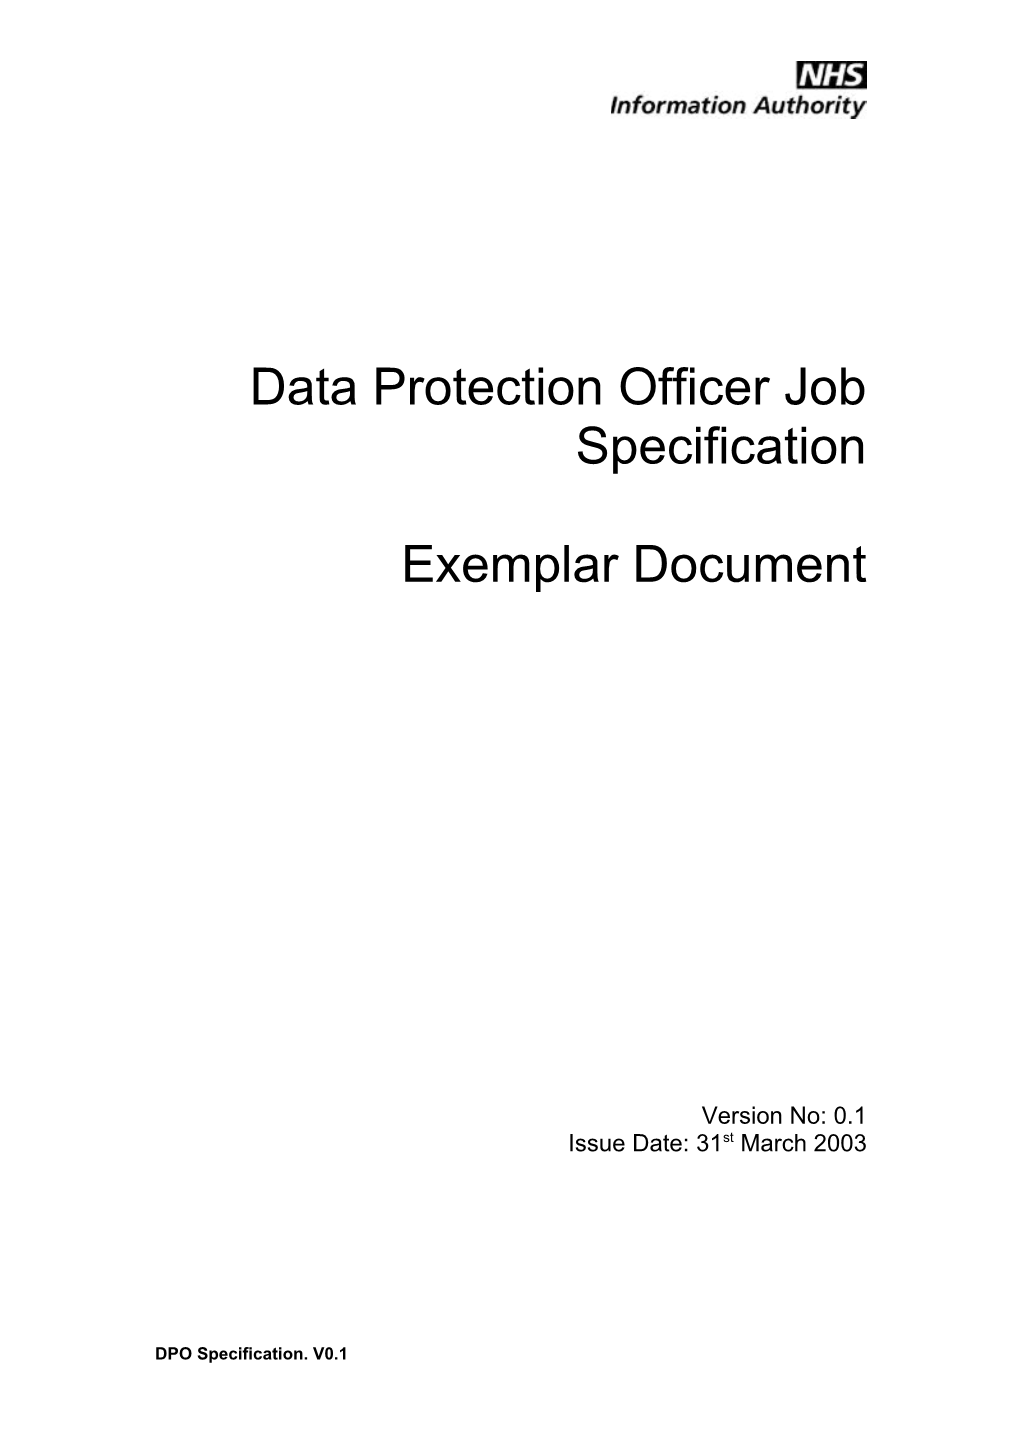 Data Protection Officer Job Specification